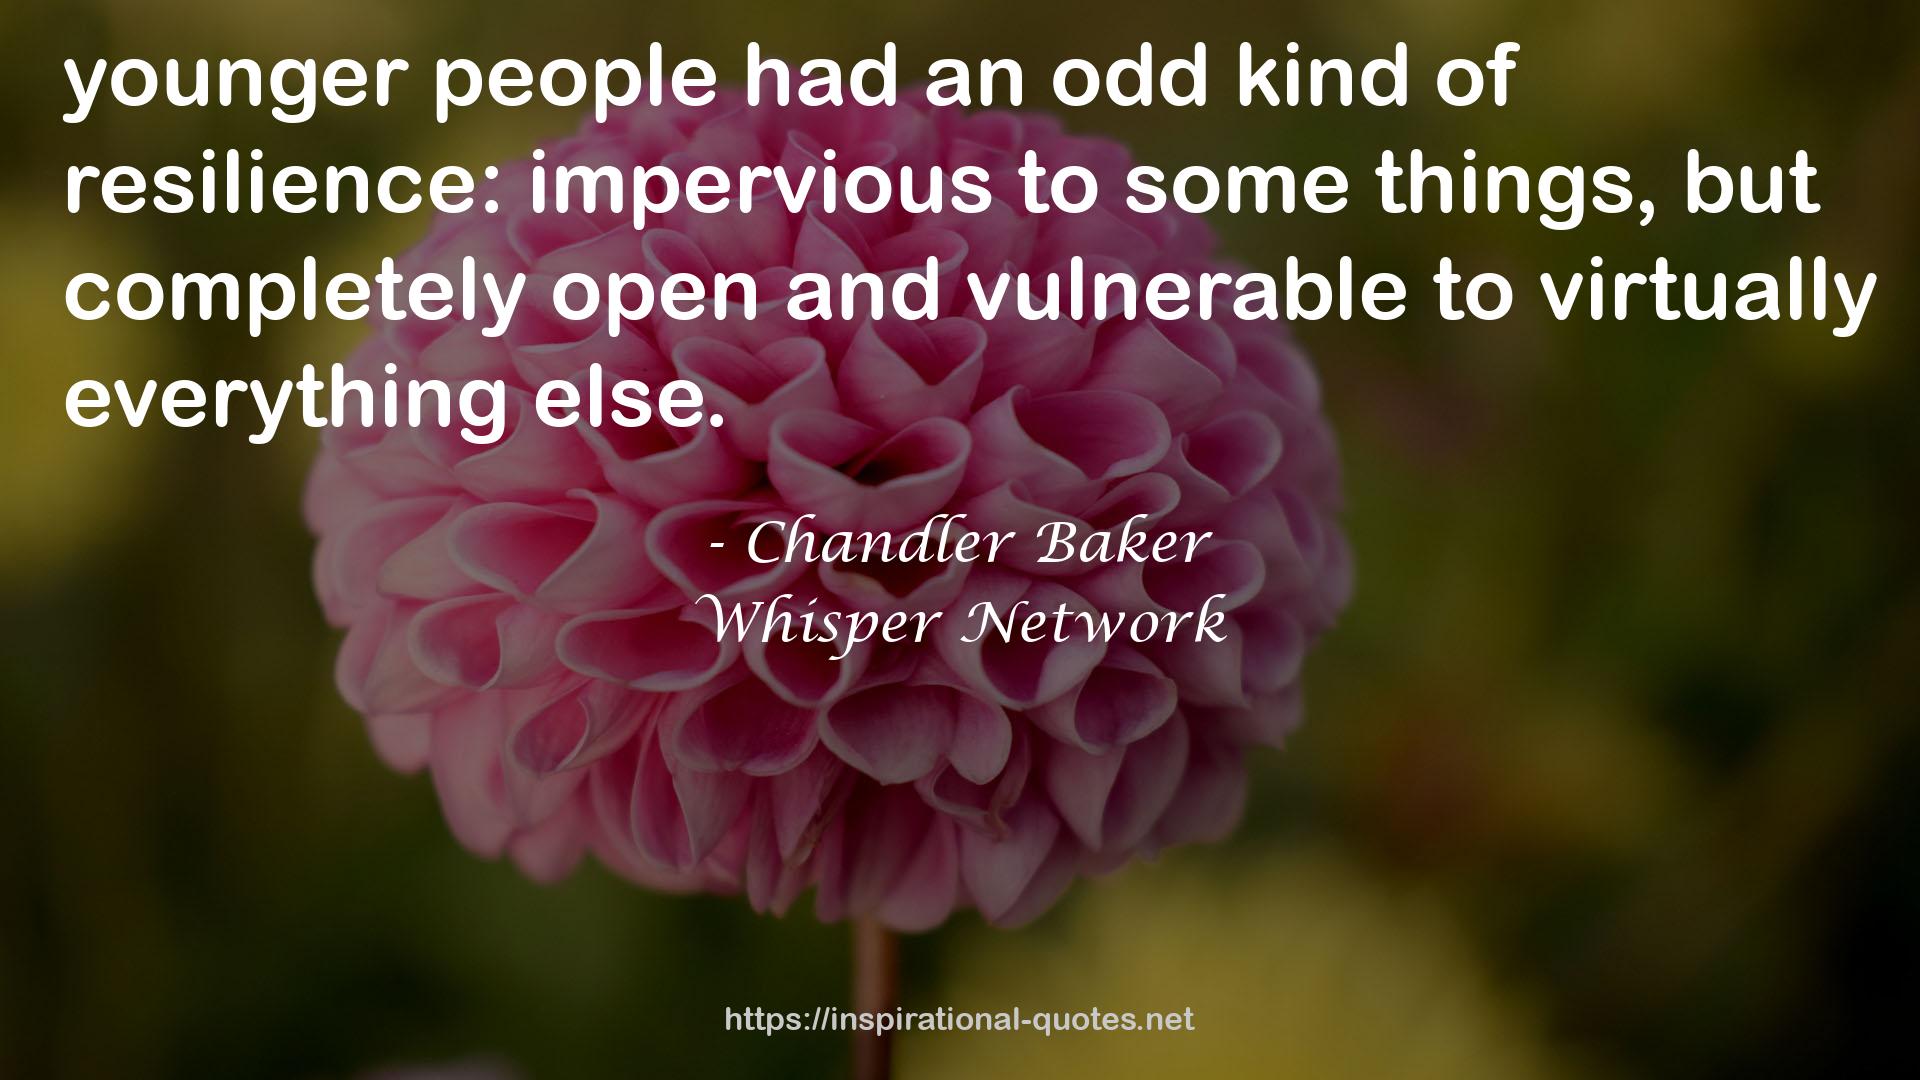 Chandler Baker QUOTES